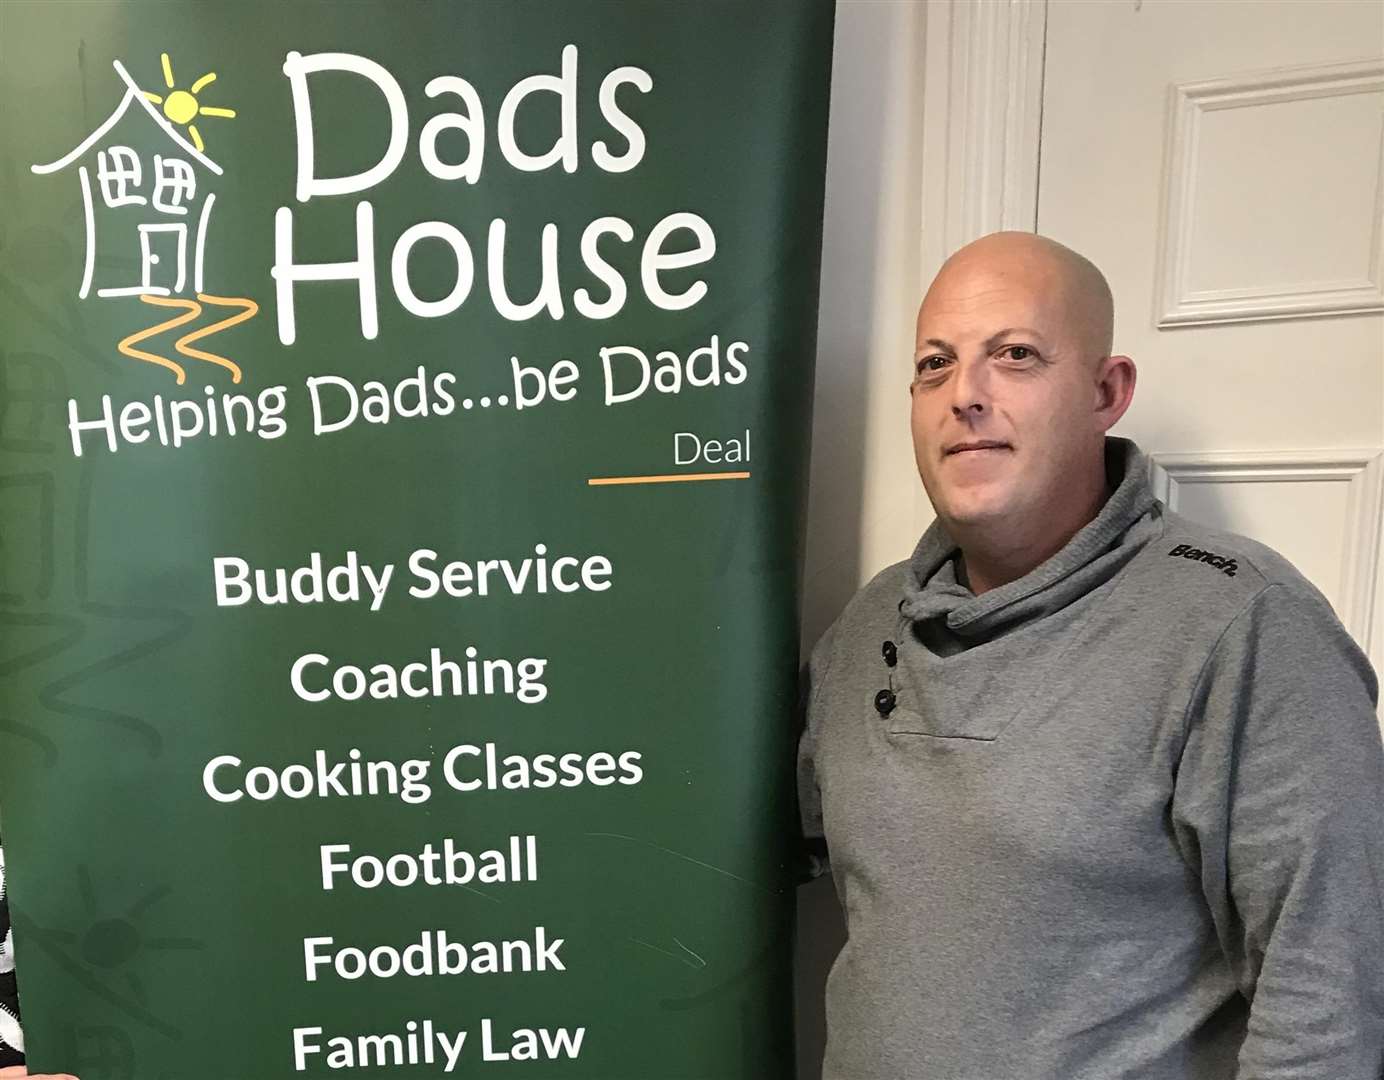 Luke Shaw from Dads House Kent is relaunching a breakfast club for dads and their children